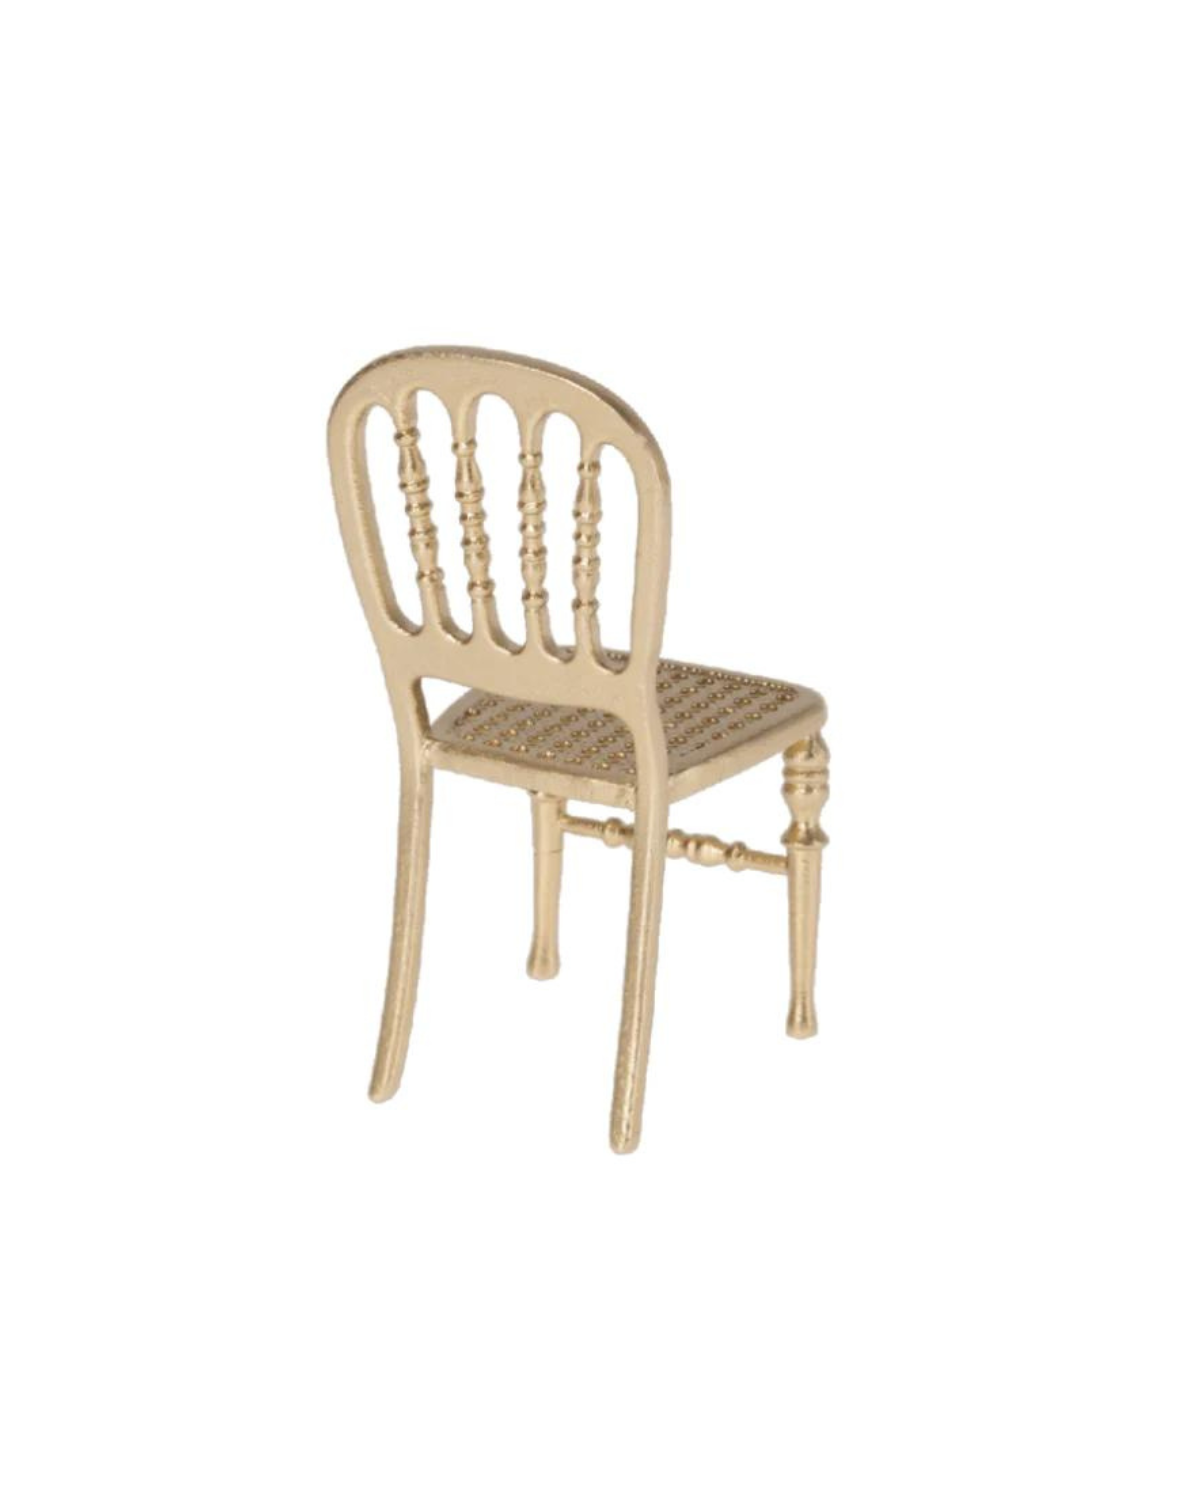 Maileg Gold Chair for Mouse - Charming Dollhouse Furniture